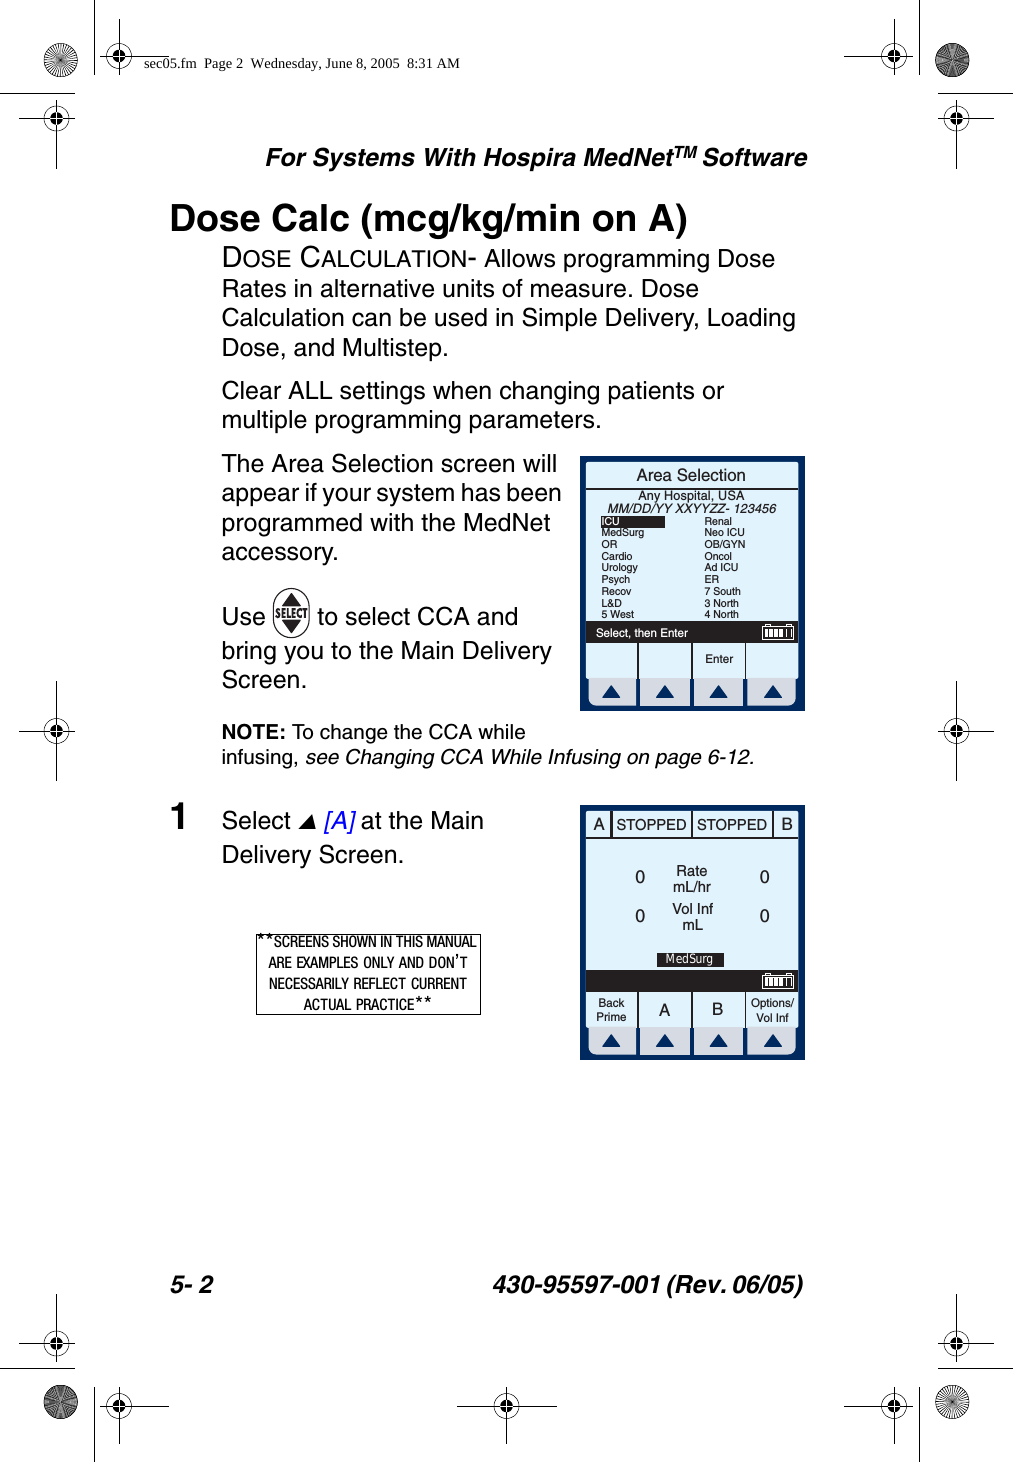 For Systems With Hospira MedNetTM Software5- 2 430-95597-001 (Rev. 06/05) Dose Calc (mcg/kg/min on A)DOSE CALCULATION- Allows programming Dose Rates in alternative units of measure. Dose Calculation can be used in Simple Delivery, Loading Dose, and Multistep.Clear ALL settings when changing patients or multiple programming parameters.The Area Selection screen will appear if your system has been programmed with the MedNet accessory. Use   to select CCA and bring you to the Main Delivery Screen.NOTE: To change the CCA while infusing, see Changing CCA While Infusing on page 6-12.1Select  [A] at the Main Delivery Screen.Area SelectionEnterSelect, then EnterAny Hospital, USAMM/DD/YY XXYYZZ- 123456ICUMedSurgORCardioUrologyPsychRecovL&amp;D5 WestRenalNeo ICUOB/GYNOncolAd ICUER7 South3 North4 NorthAABBSTOPPED STOPPEDRatemL/hrVol InfmLOptions/Vol InfBackPrime0000MedSurg**SCREENS SHOWN IN THIS MANUAL ARE EXAMPLES ONLY AND DON’T NECESSARILY REFLECT CURRENT ACTUAL PRACTICE**sec05.fm  Page 2  Wednesday, June 8, 2005  8:31 AM